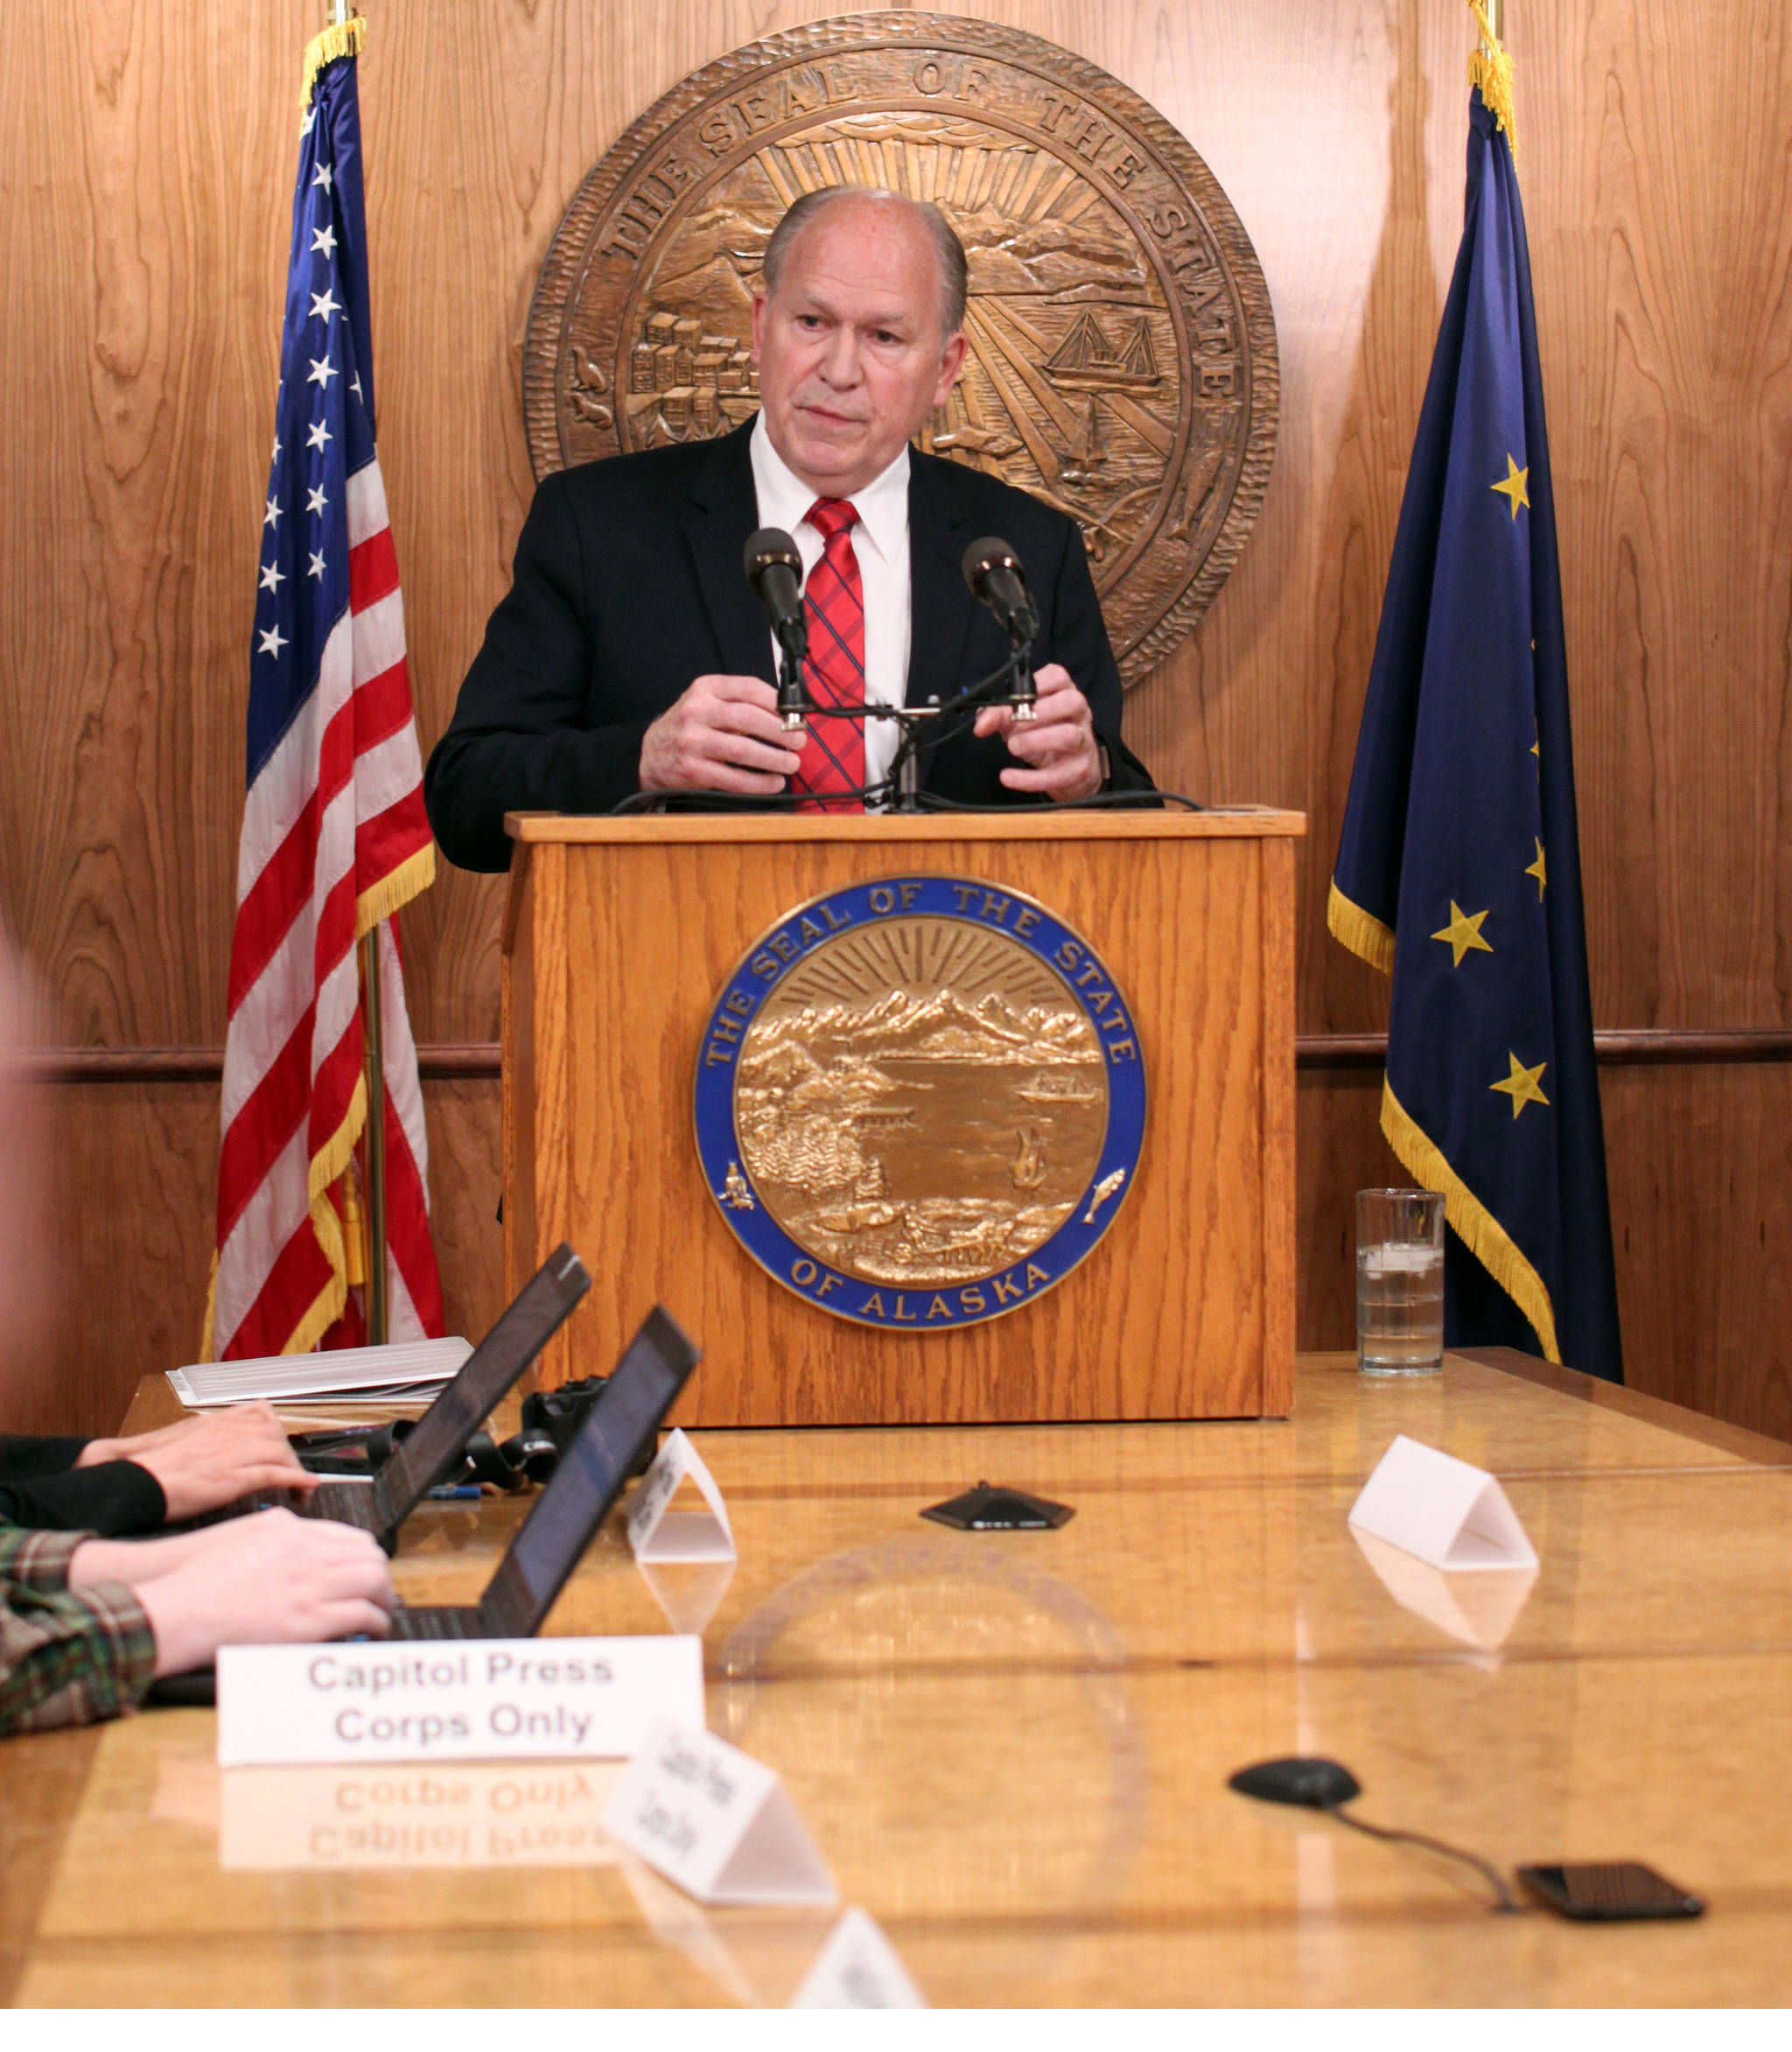 In a press conference held Tuesday afternoon, Gov. Walker warned of a potential government shutdown if the state house and senate could not reach an agreement on the state budget and several tax bills by July 3. (Erin Granger | Juneau Empire)